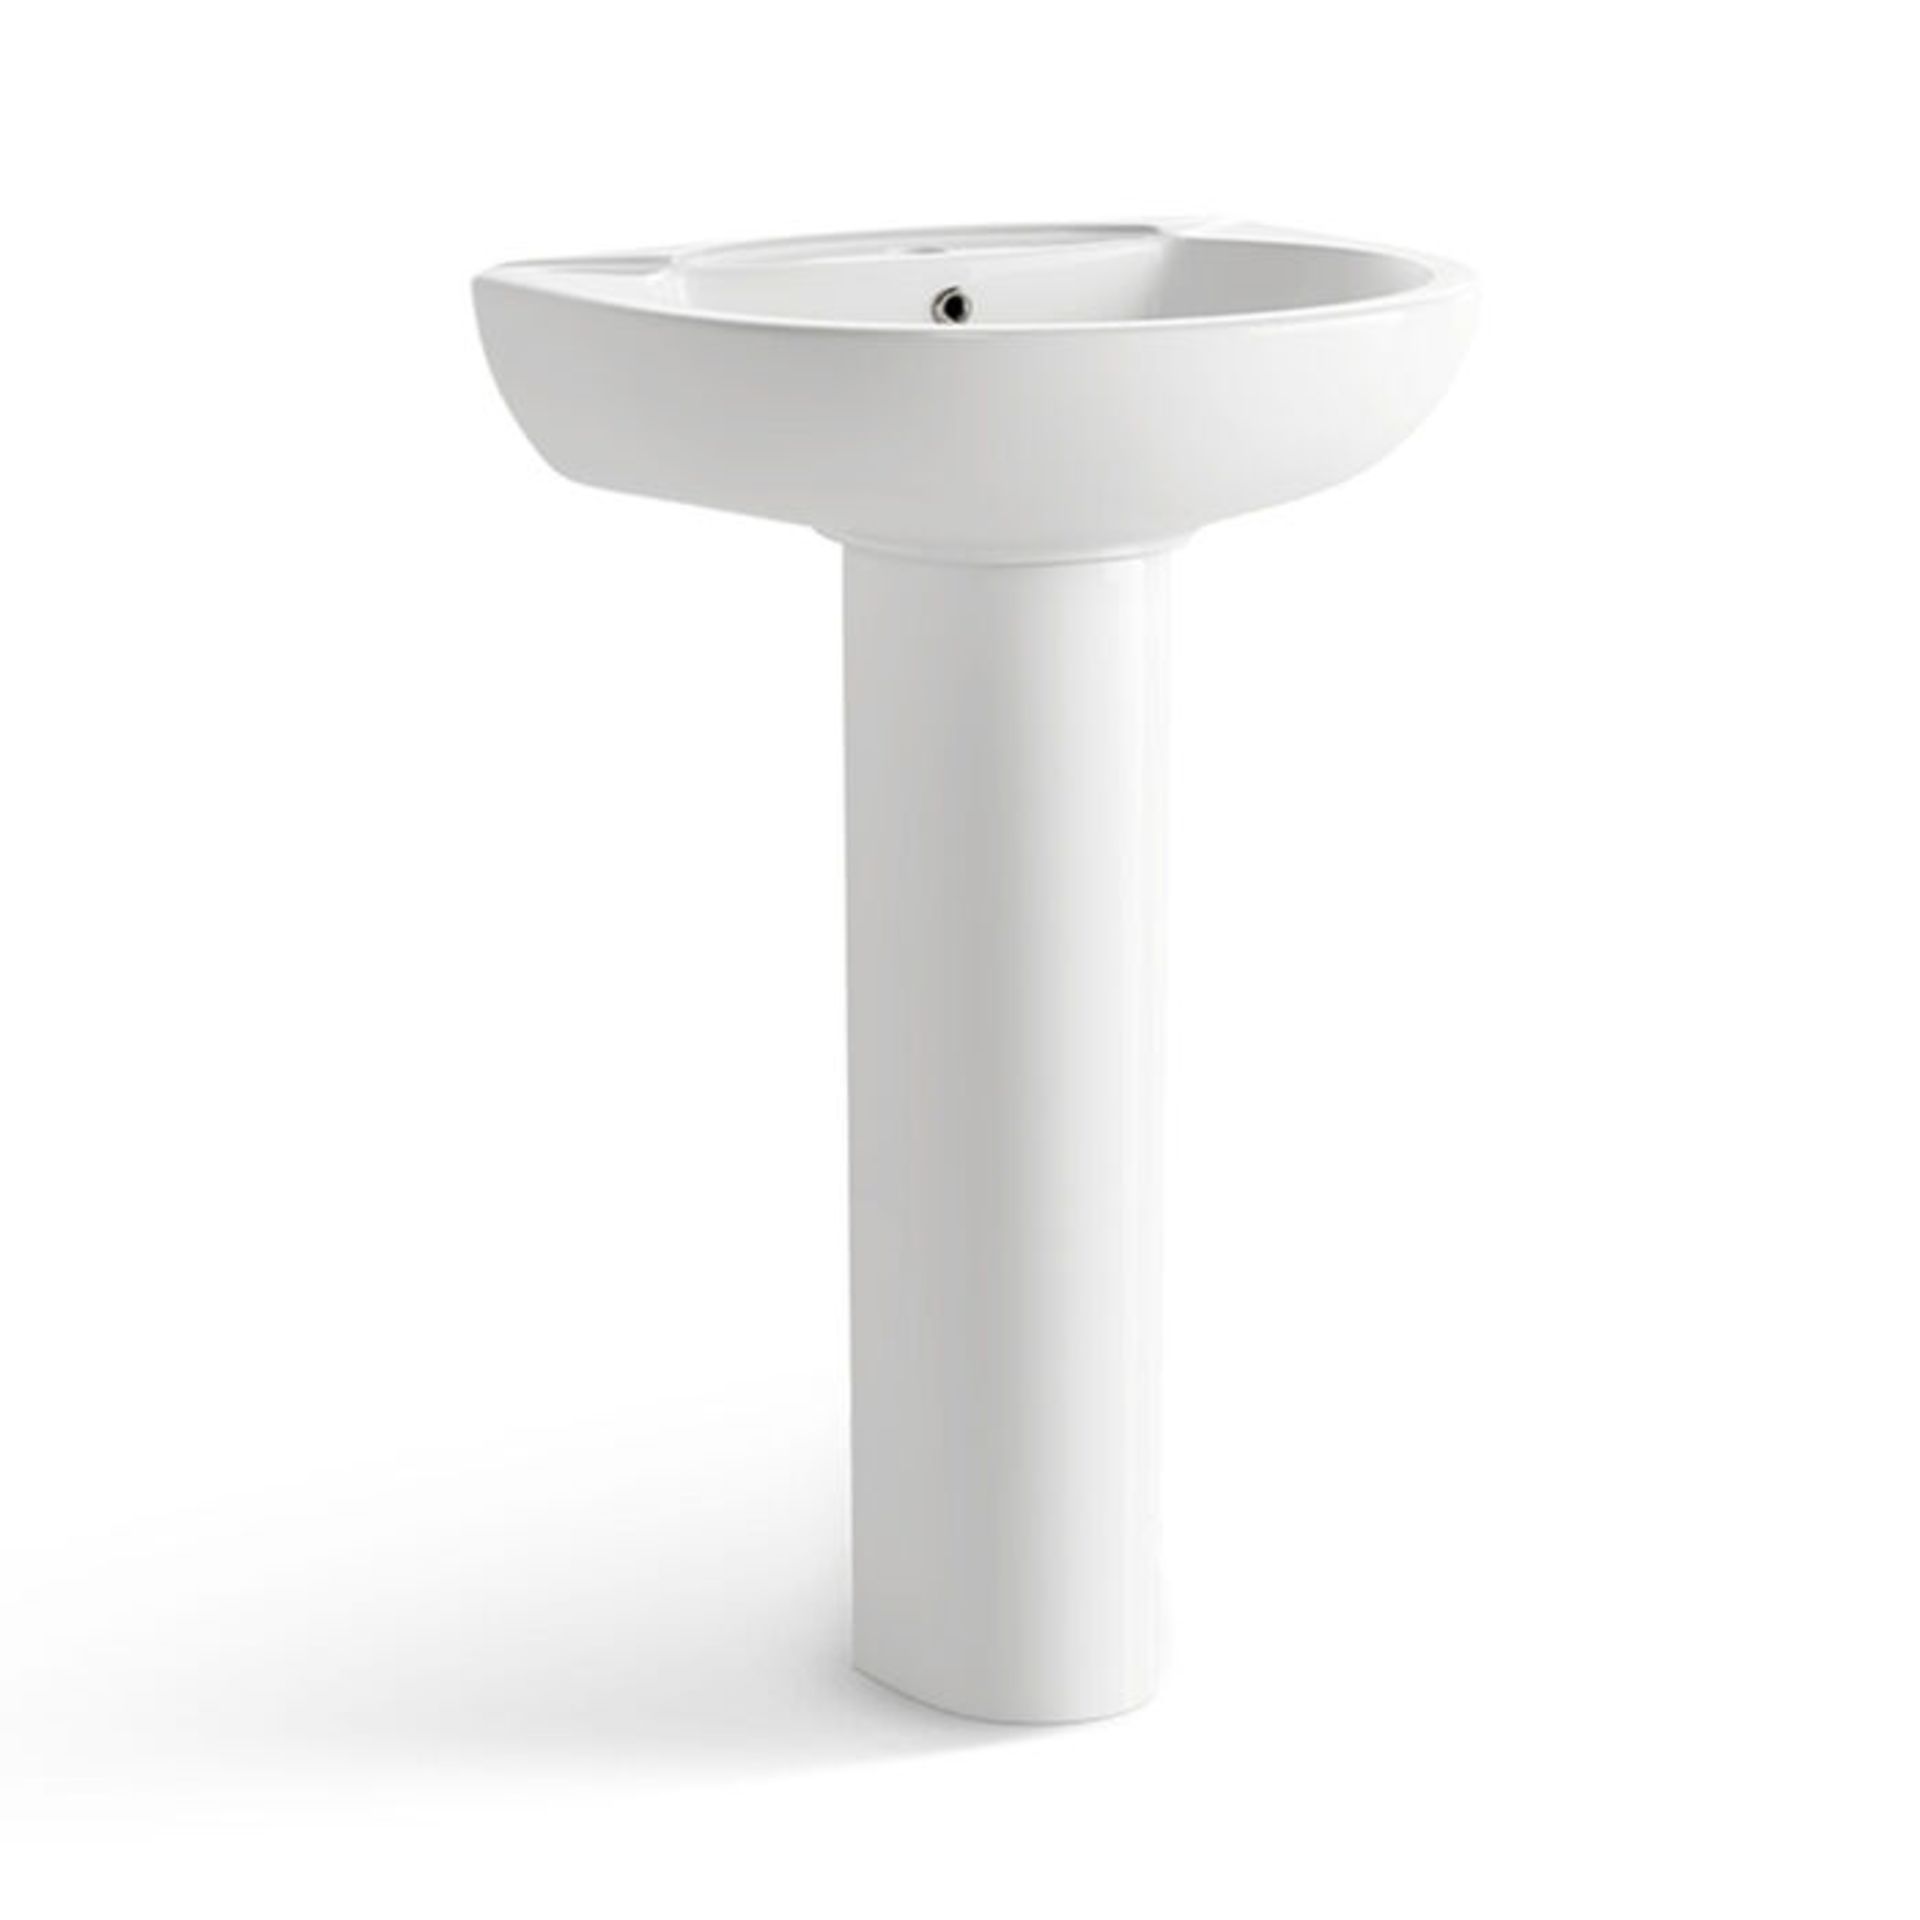 Sink & Pedestal - Single Tap Hole. Made from White Vitreous China and finished with a high glos... - Image 3 of 3